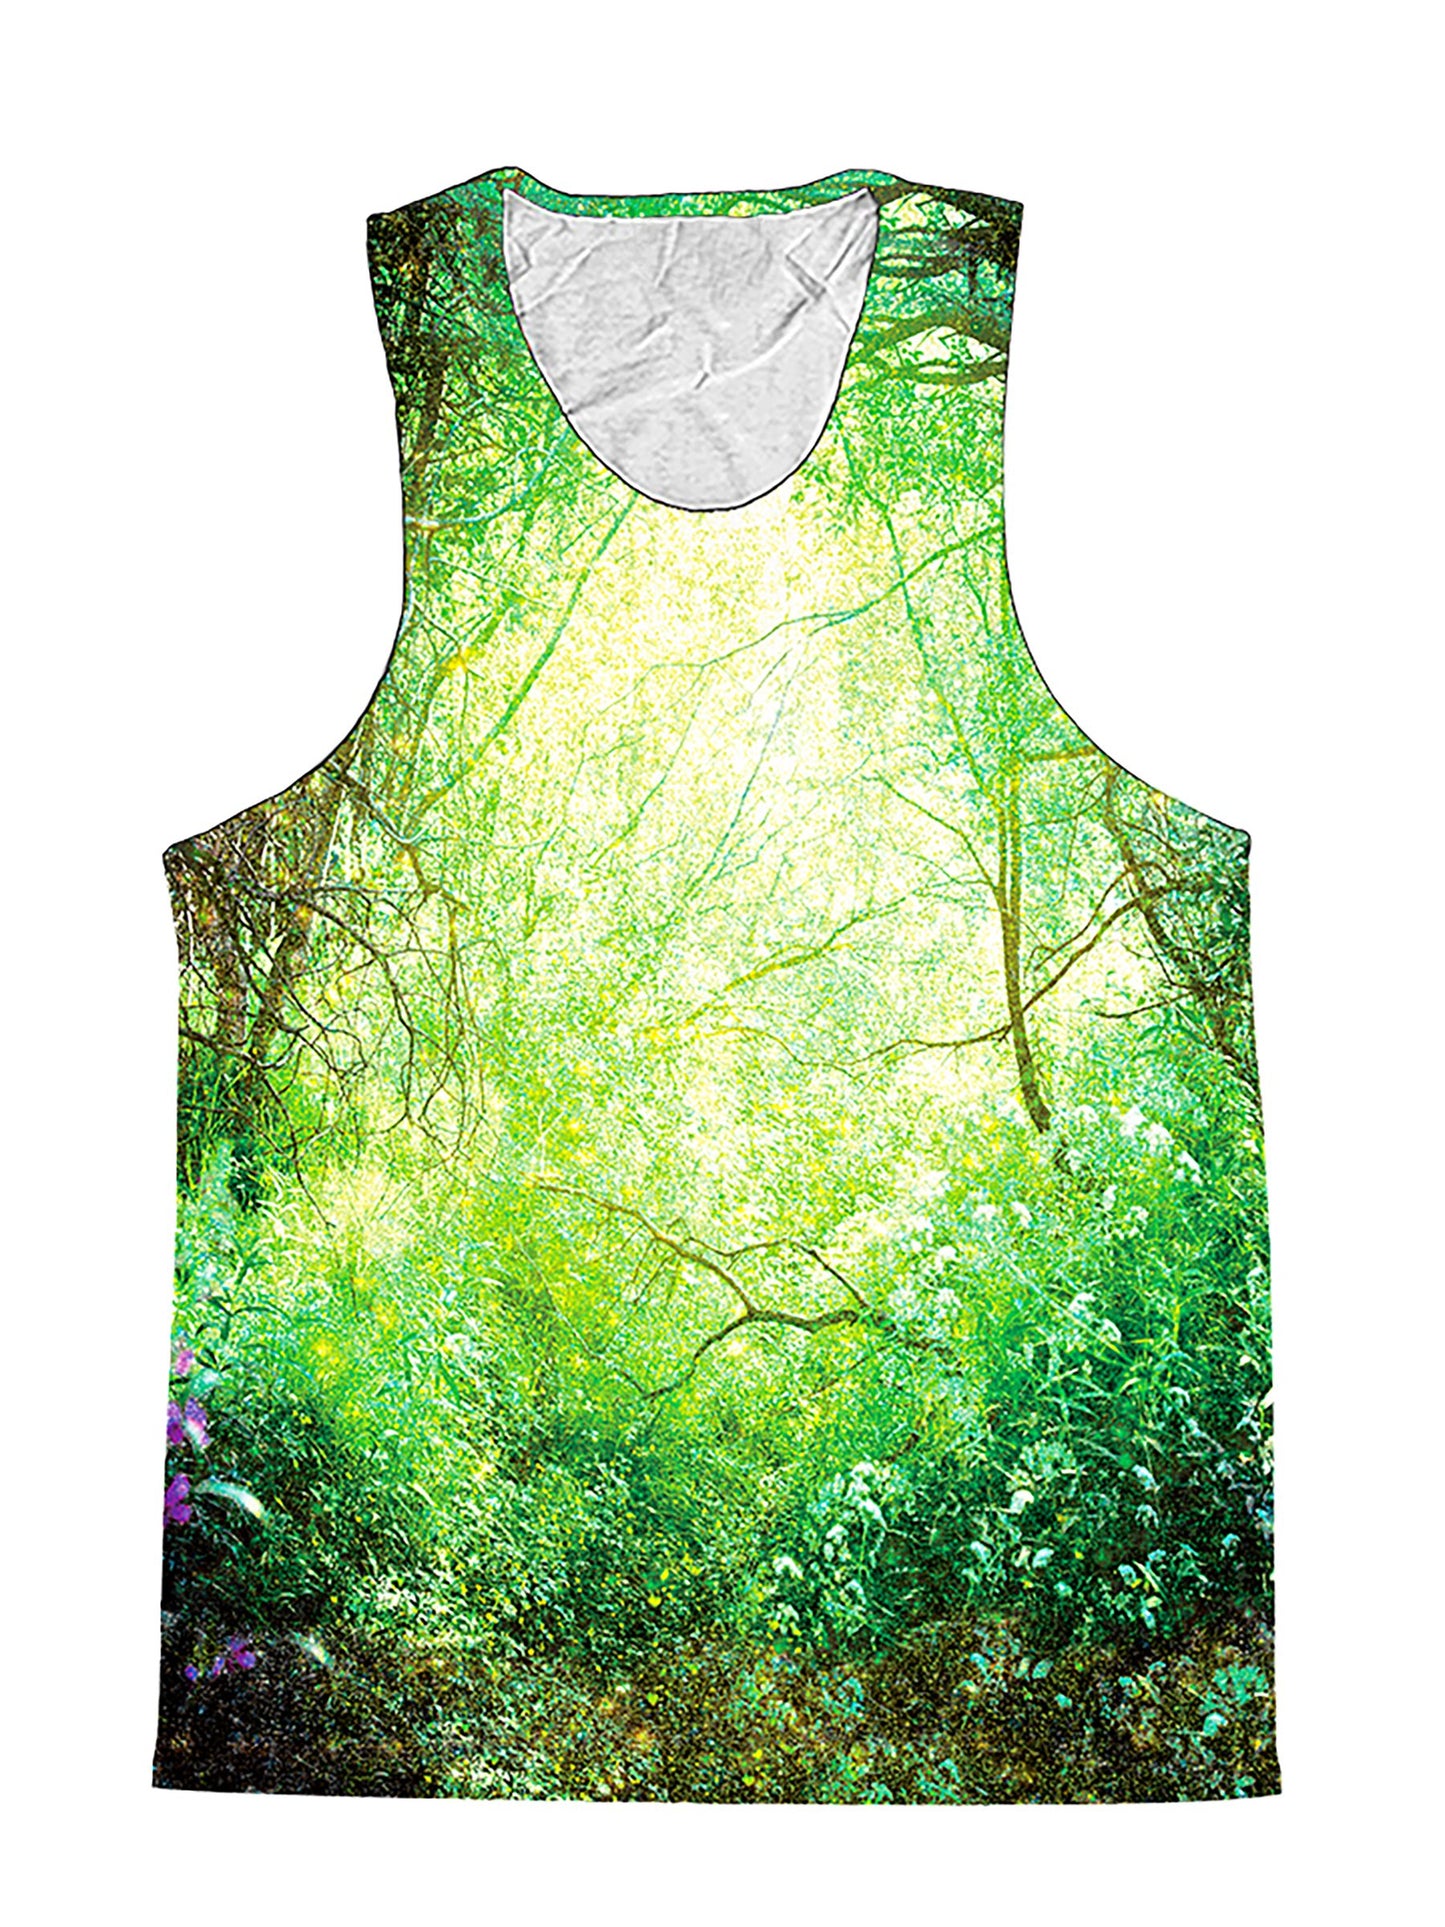 Special Place Enchanted Forest Premium Tank Top - Boogie Threads